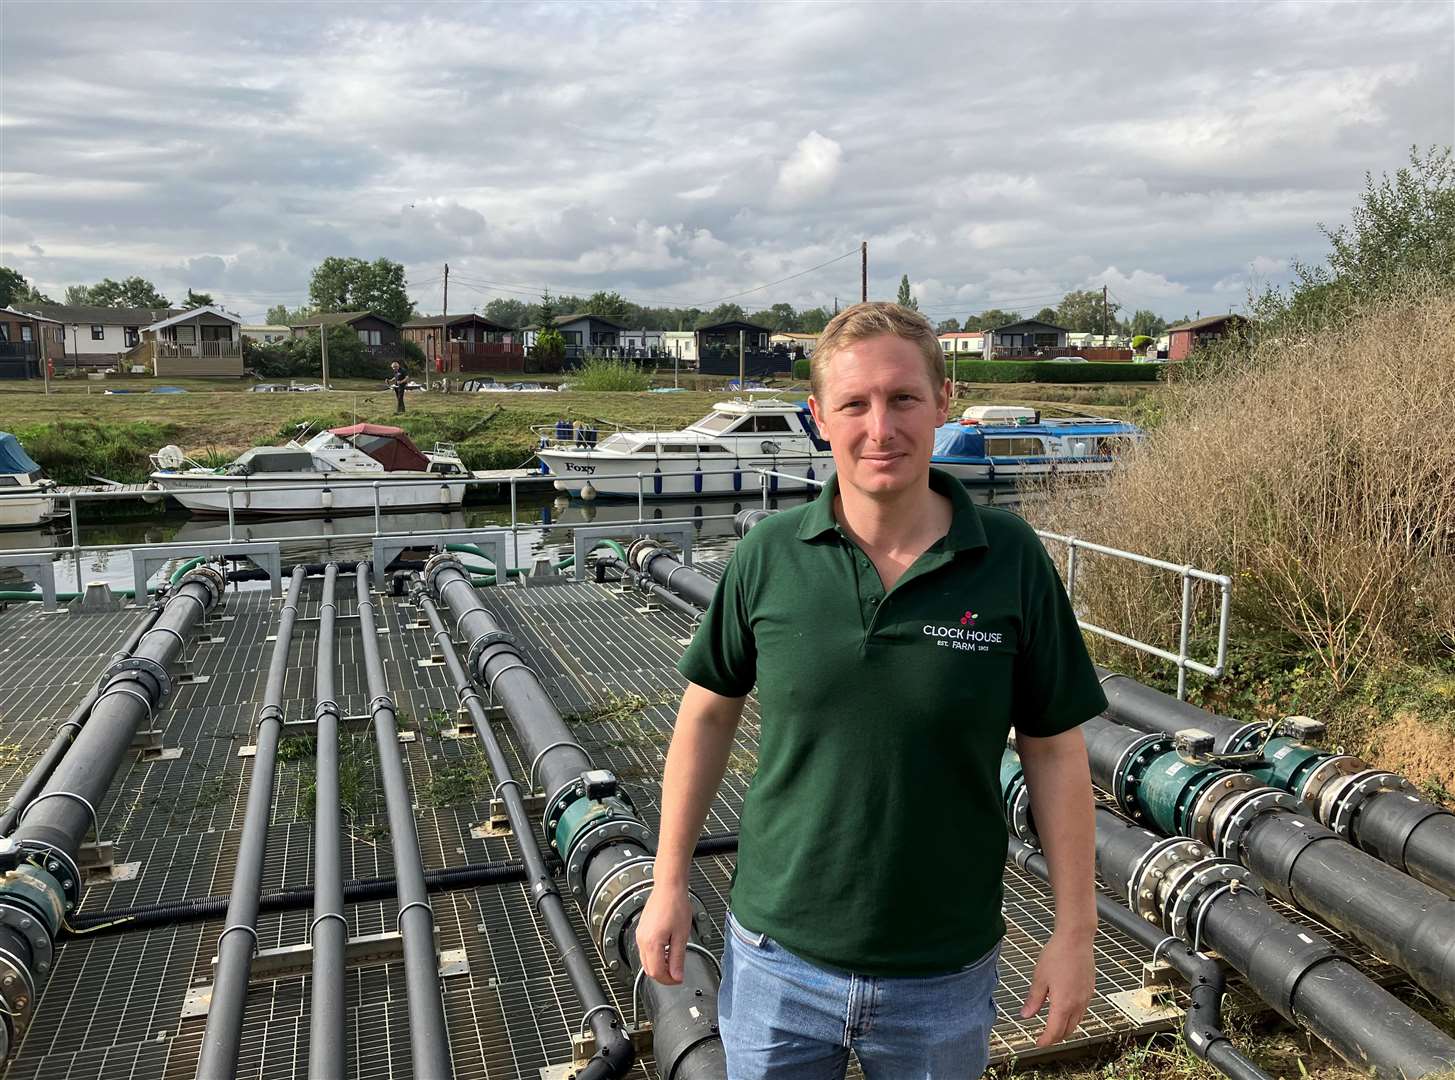 Oli Pascall with the river heat pump system by the Medway at Yalding